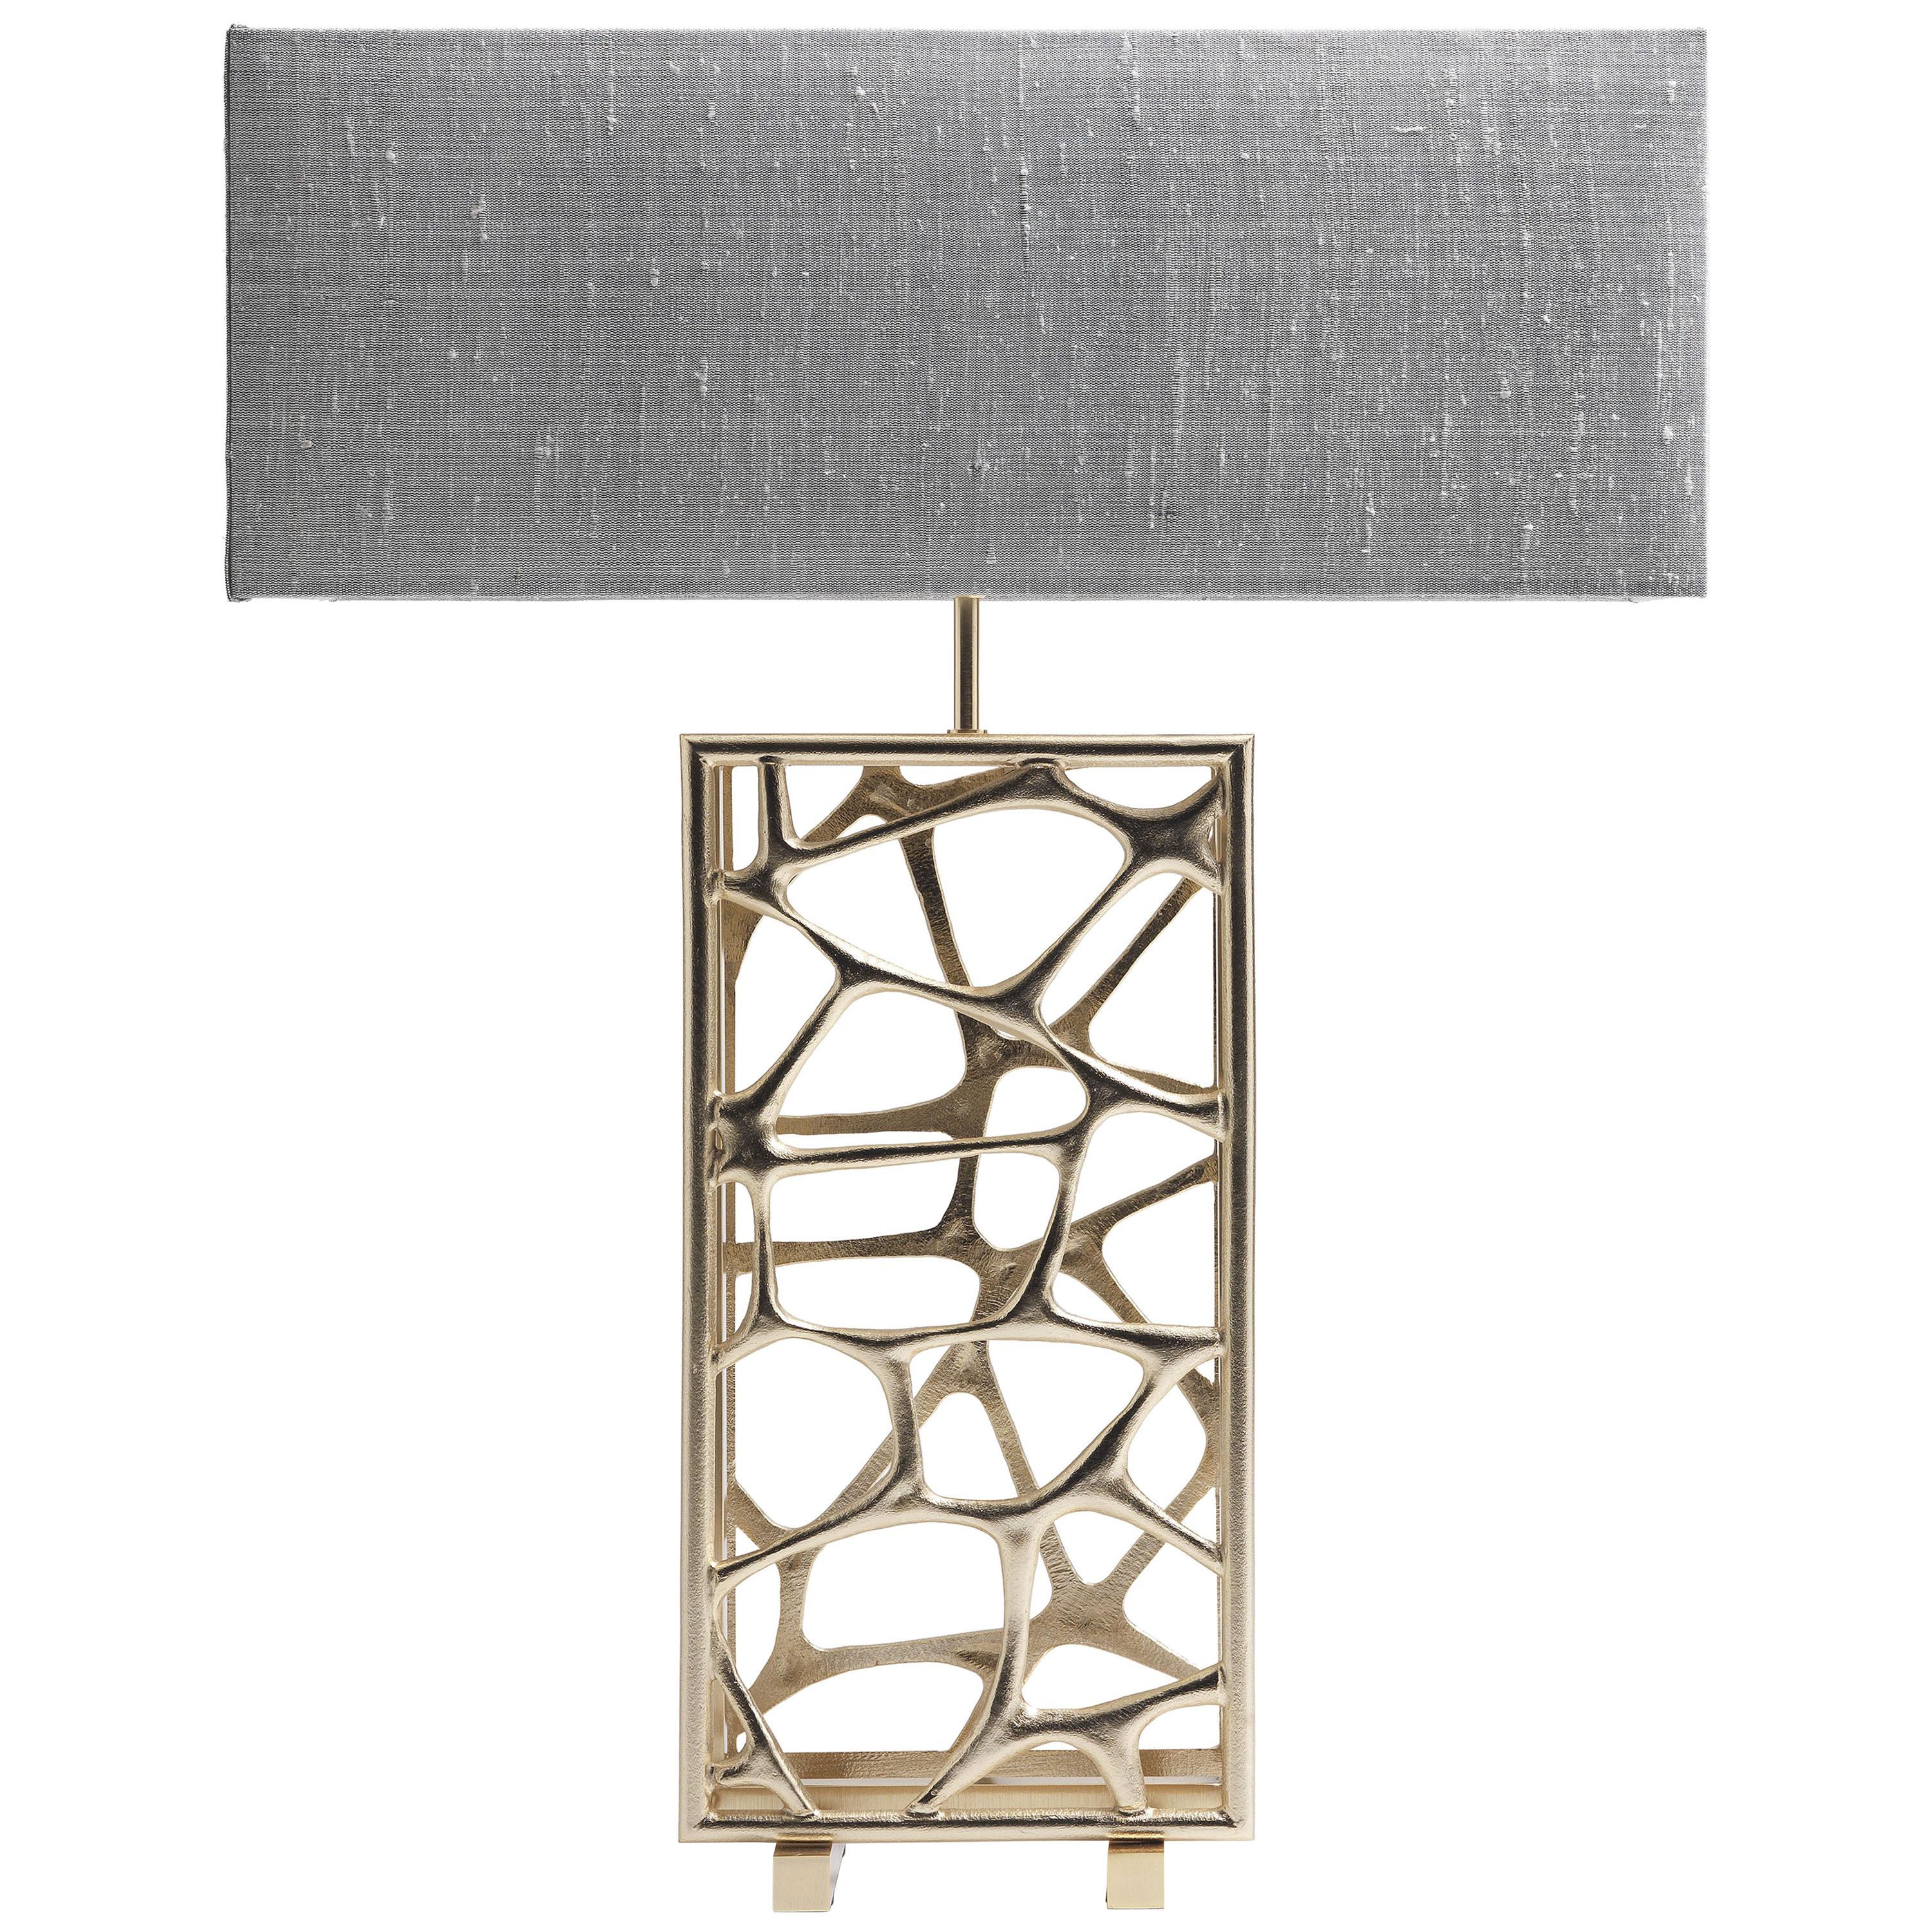 21st Century Sioraf.4 Table Lamp in Brass by Roberto Cavalli Home Interiors 